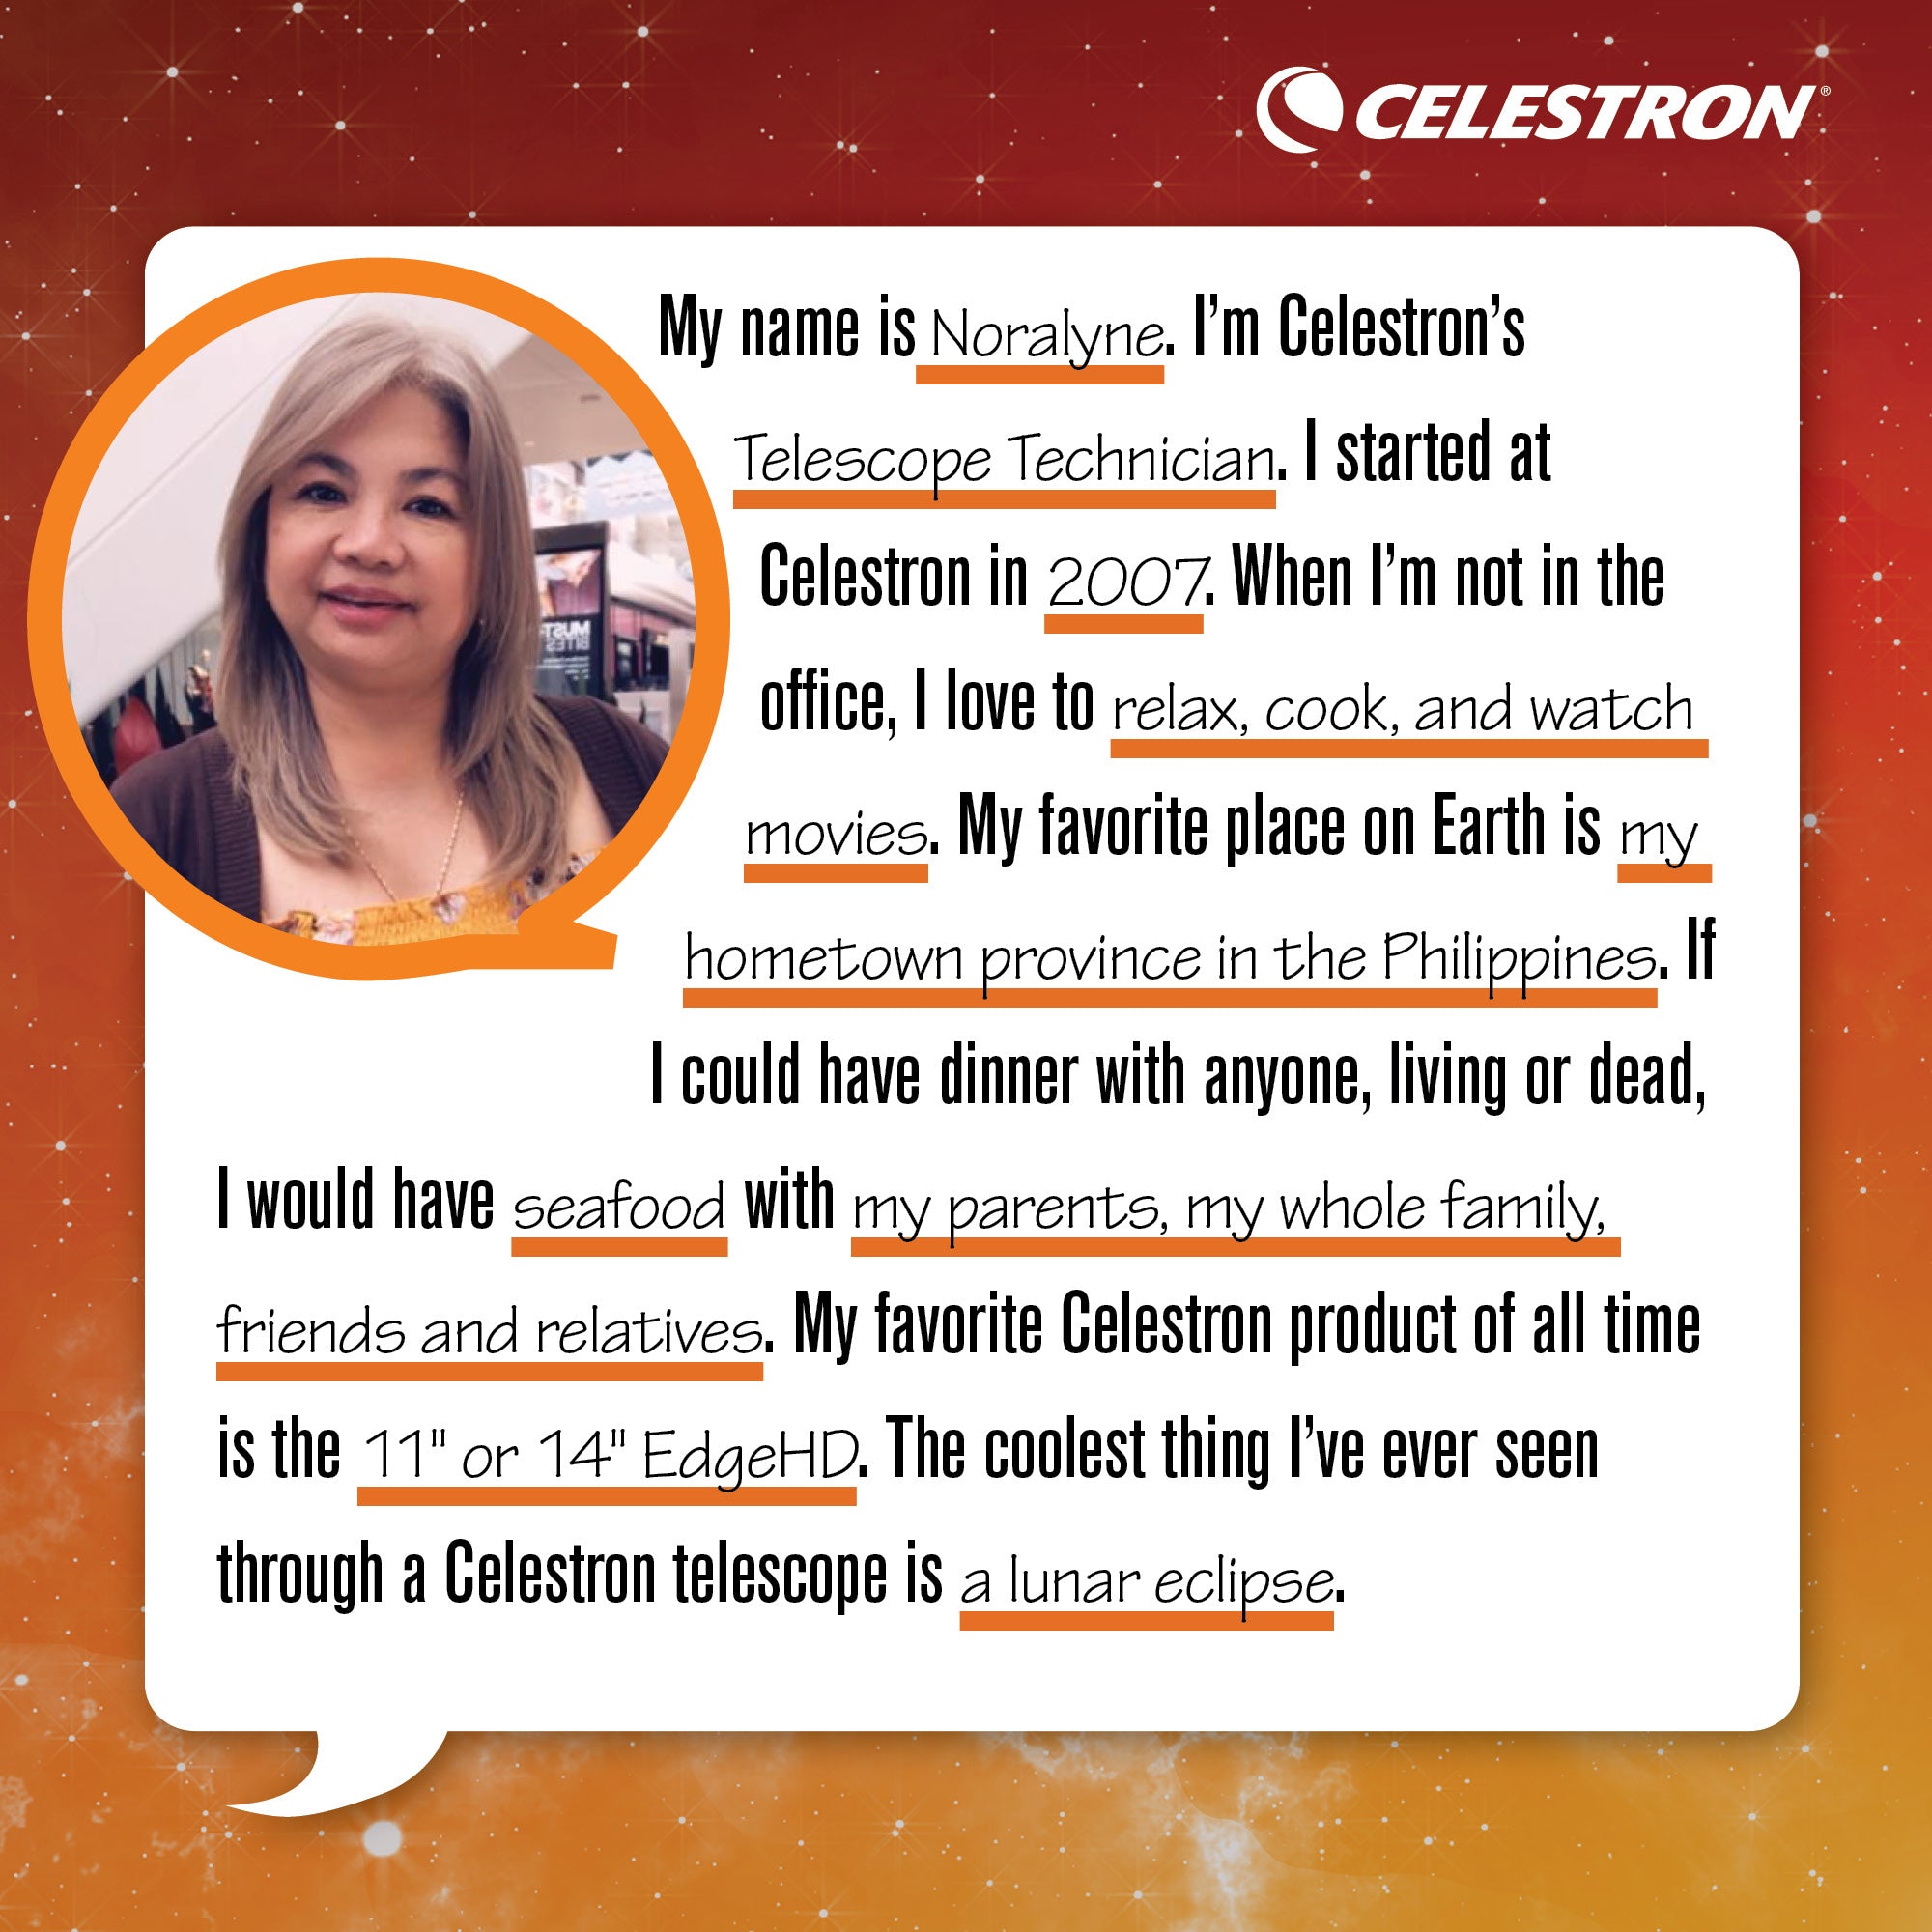 My name is Noralyne. I’m Celestron’s Telescope Technician. I started at Celestron in 2007. When I’m not in the office, I love to relax, cook, and watch movies. My favorite place on Earth is my hometown province in the Philippines. If I could have dinner with anyone, living or dead, I would have seafood with my parents, my whole family, friends and relatives. My favorite Celestron product of all time is the 11 or 14 EdgeHD. The coolest thing I’ve ever seen through a Celestron telescope is a lunar eclipse.